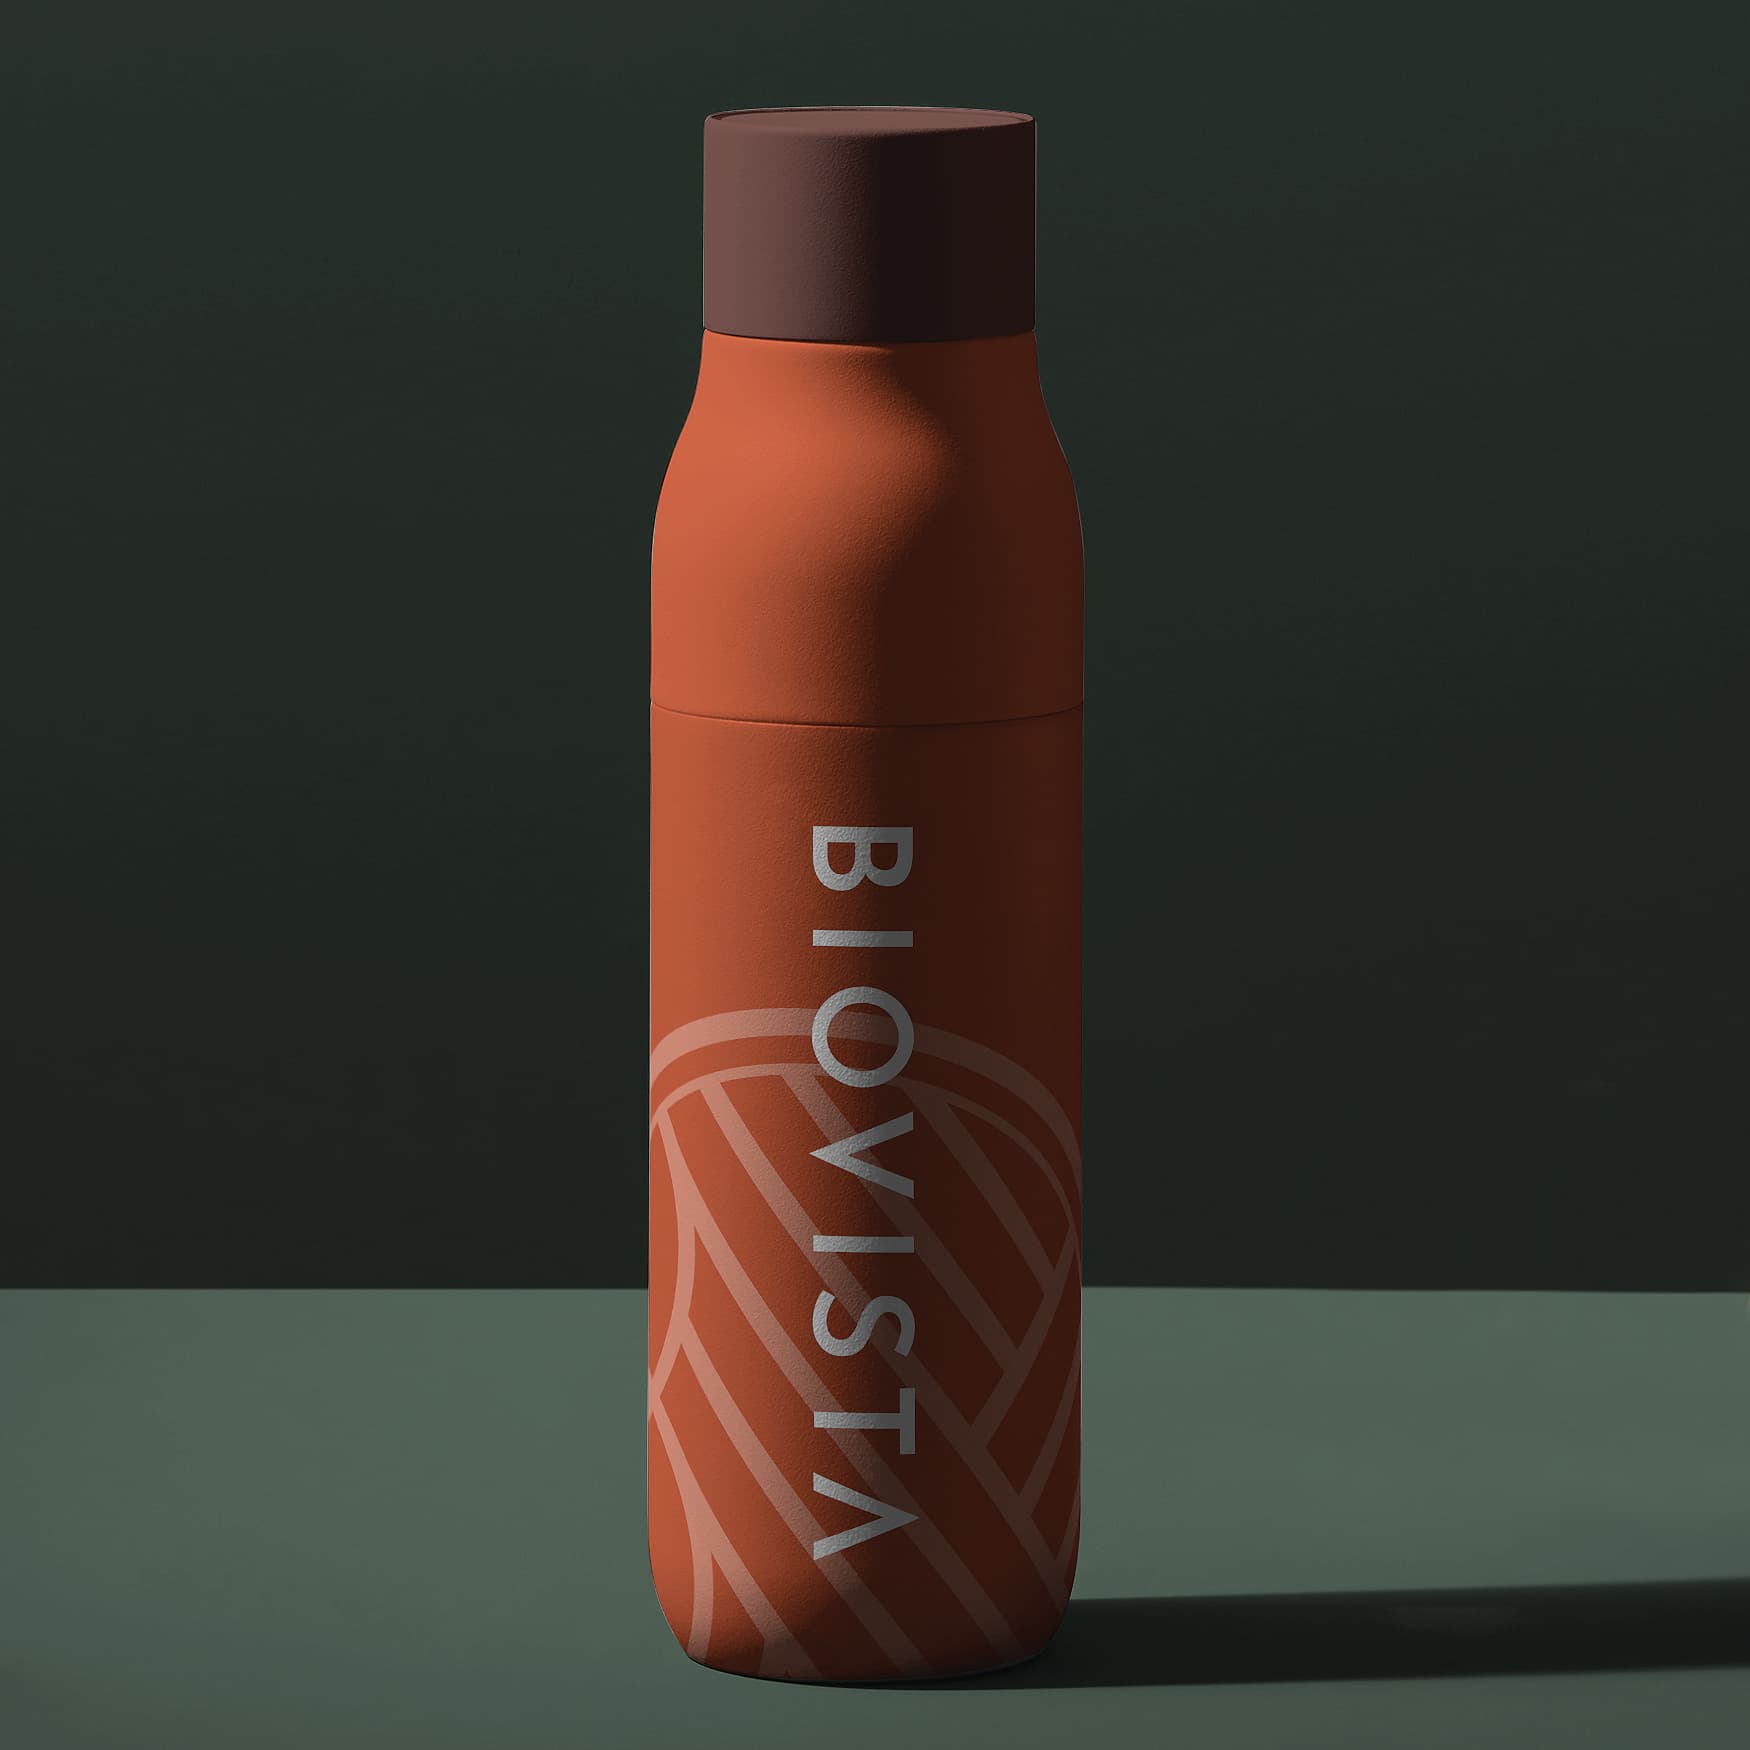 Mockup of a reusable water bottle with the BioVista wordmark and the icon logo large and behind the wordmark. Branding by RSM Design